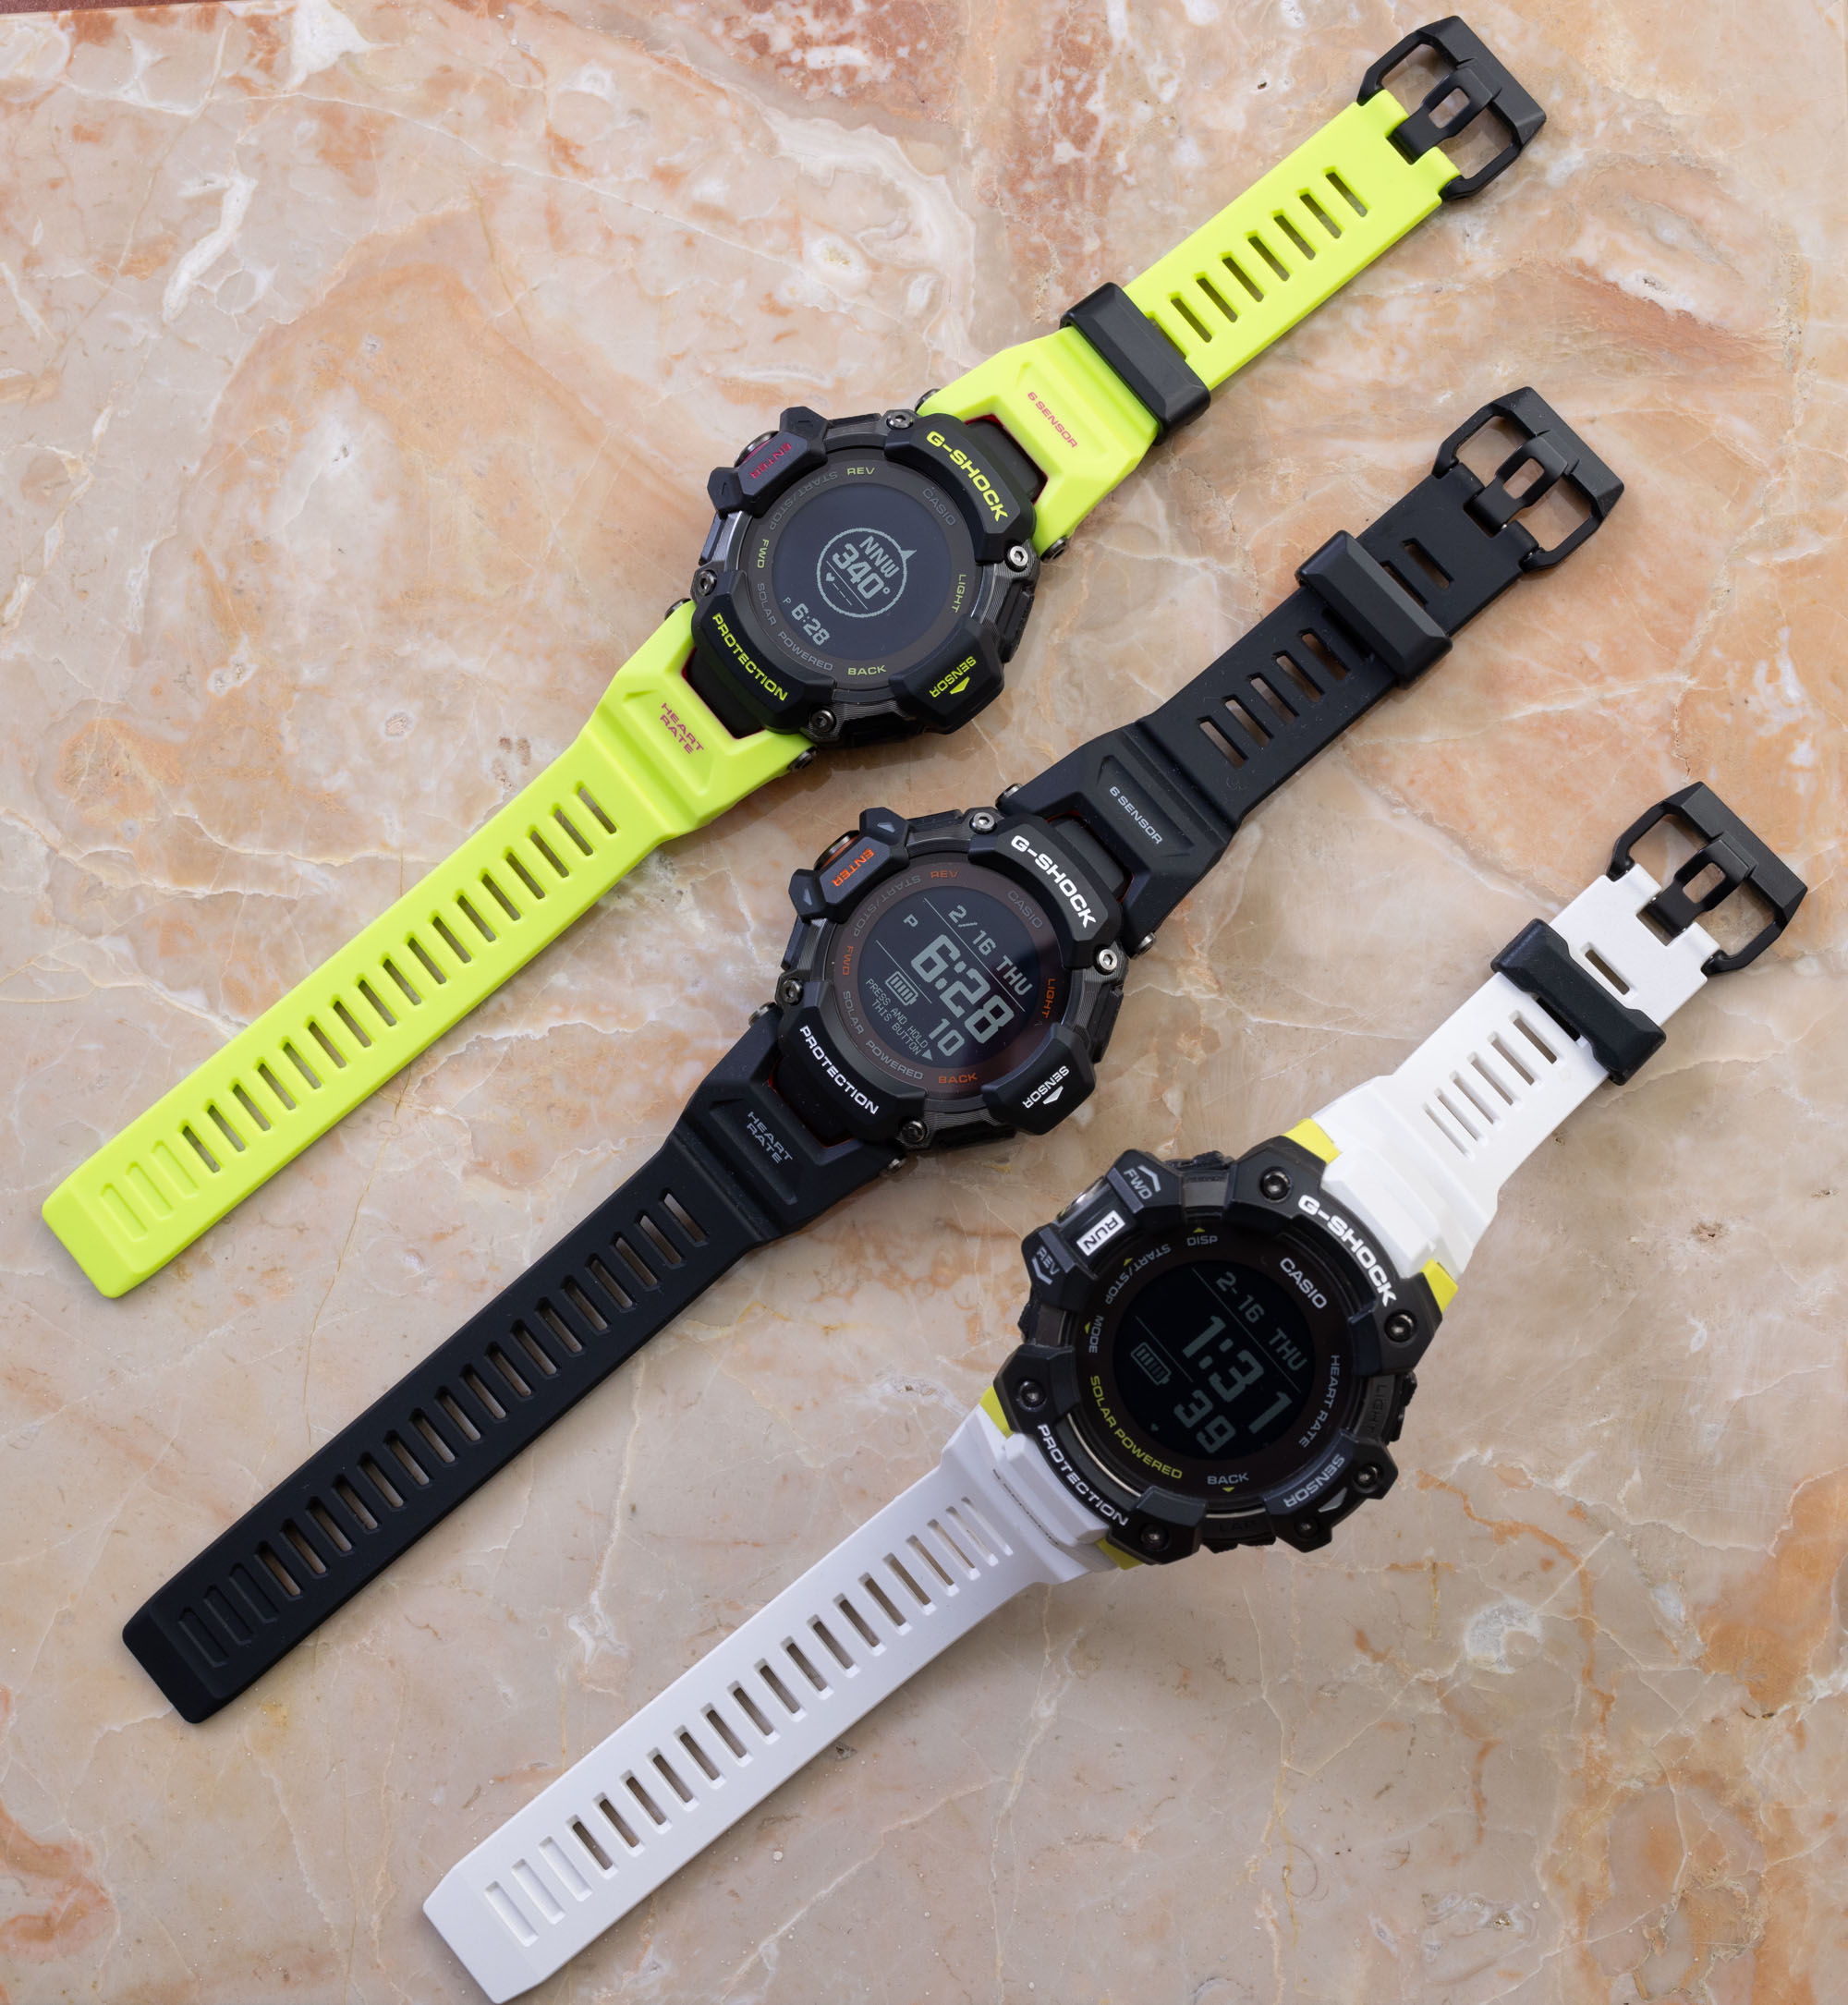 Watch Review: Casio G-Shock aBlogtoWatch GBD-H2000 Activity Smart Tracker Move 